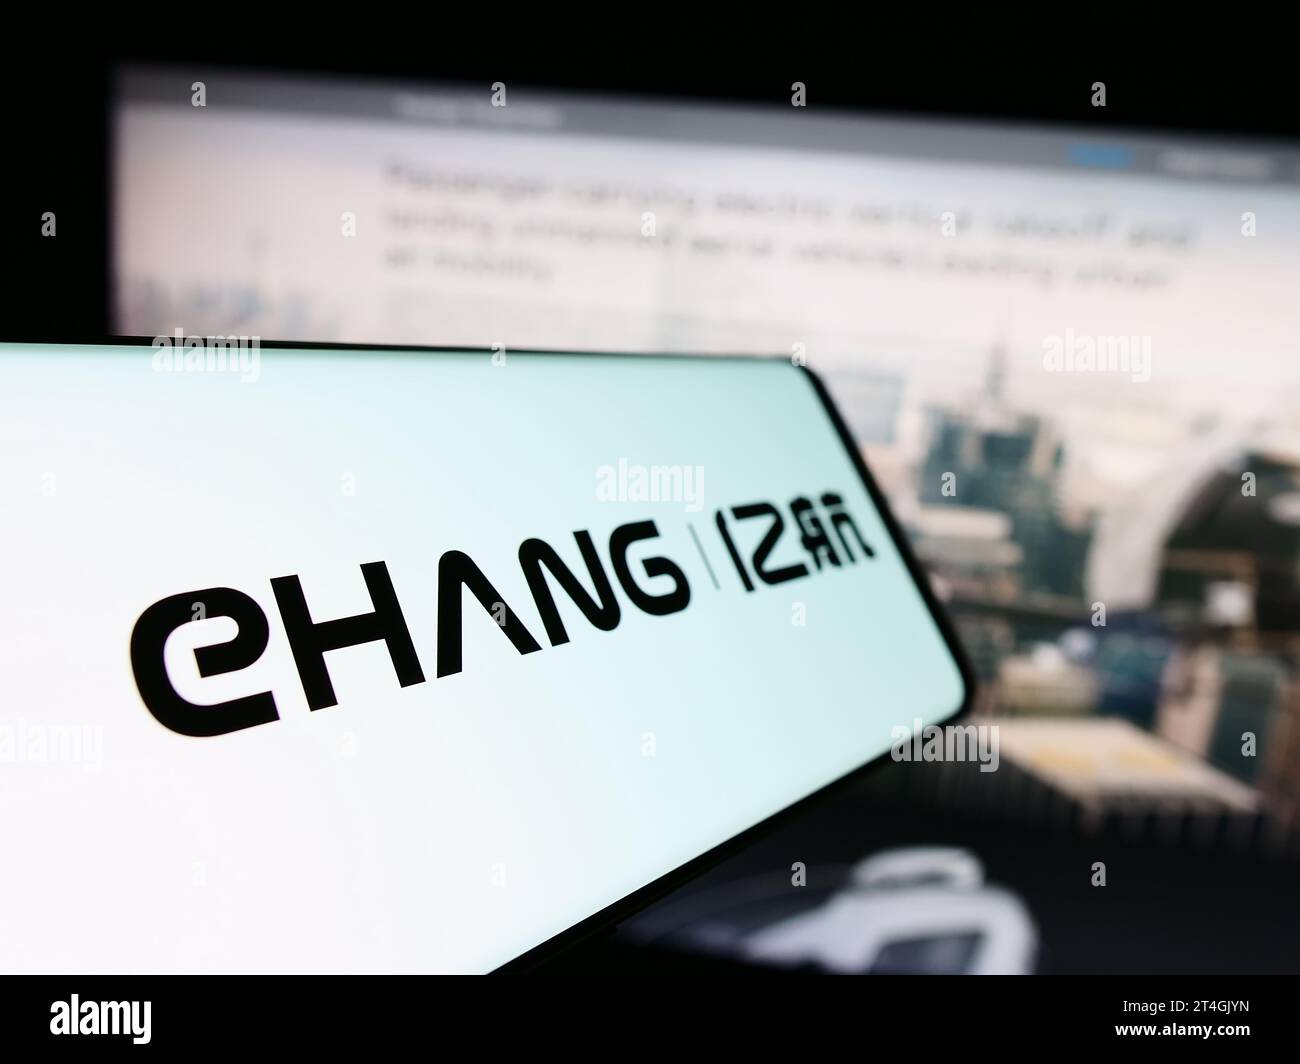 Mobile phone with logo of Chinese aviation company EHang Holdings Limited in front of business website. Focus on center-left of phone display. Stock Photo